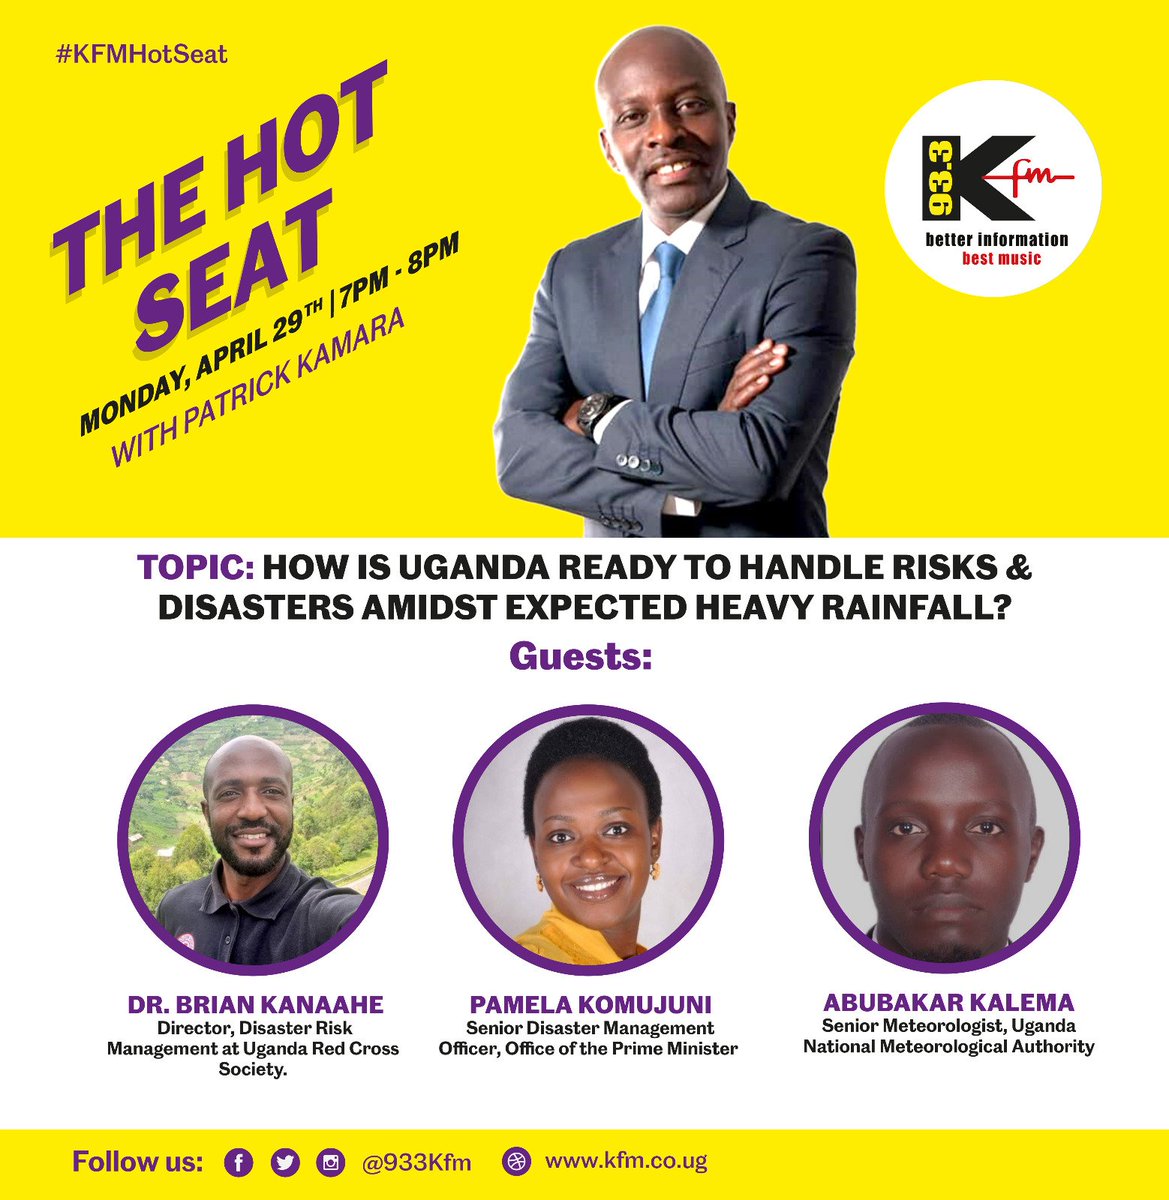 How is Uganda ready to handle risks and disasters amidst the heavy rains? Tune in to @933kfm this evening and learn from the experts. Listen to @DrBrianBilalK , @UgandaRedCross , Pamela DRR expert working with @OPMUganda and Abubaker Kalema @MeteoUganda